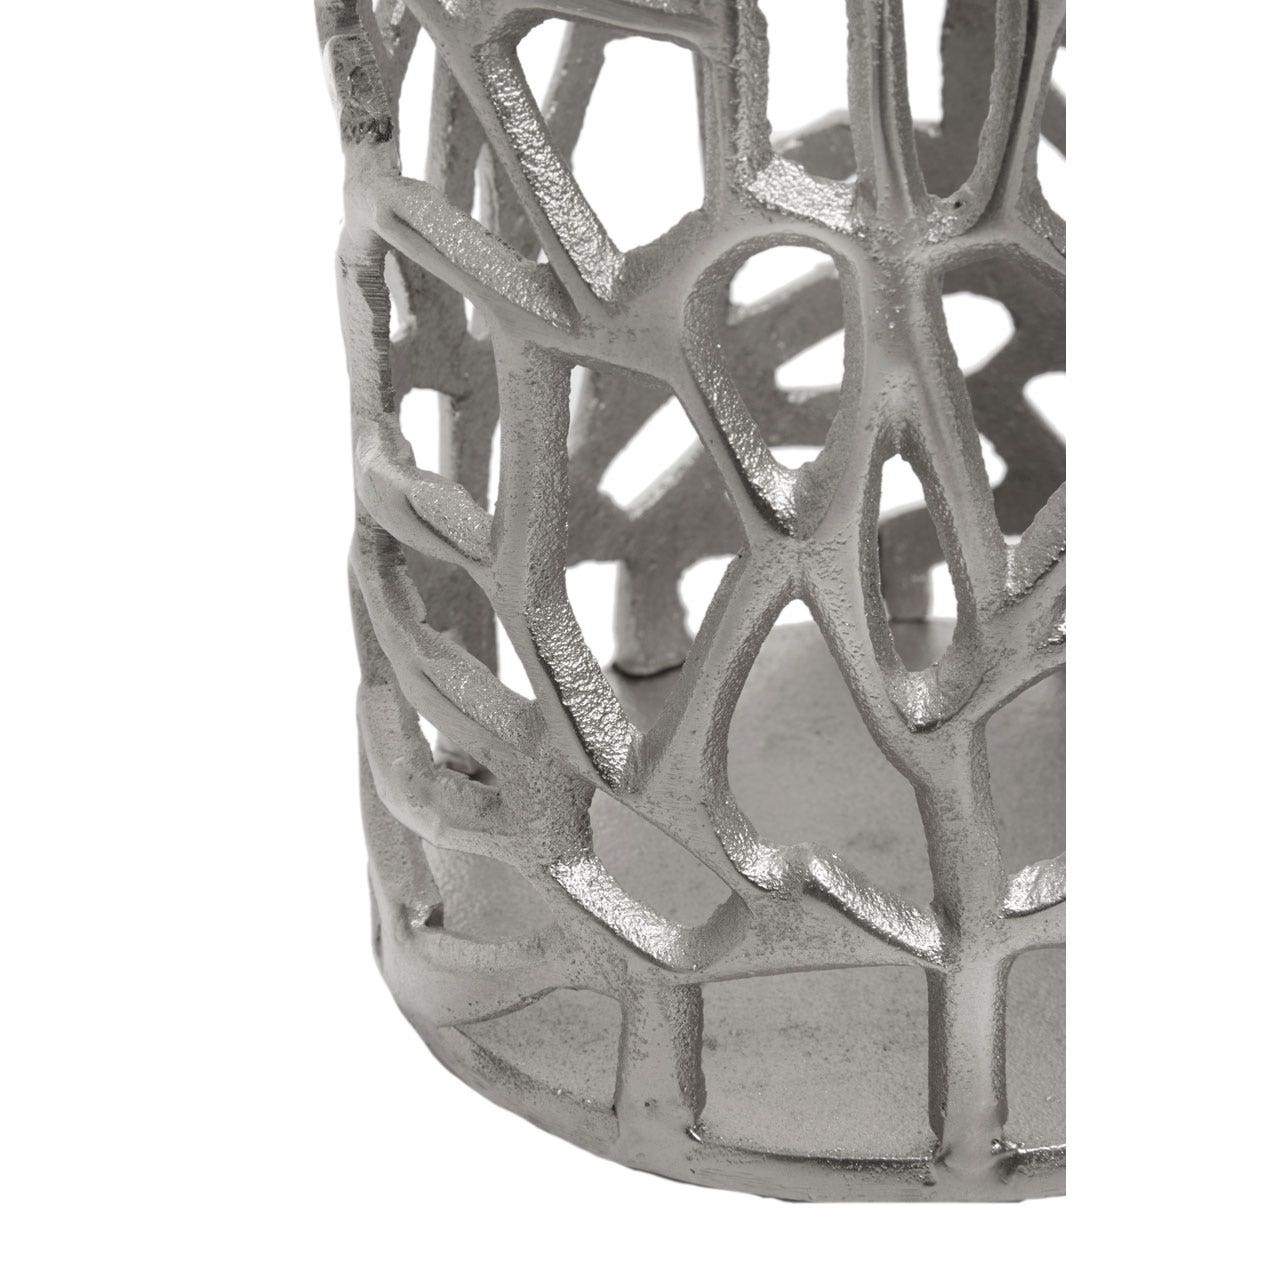 Hamilton Interiors Accessories Prato Large Silver Finish Candle Holder House of Isabella UK